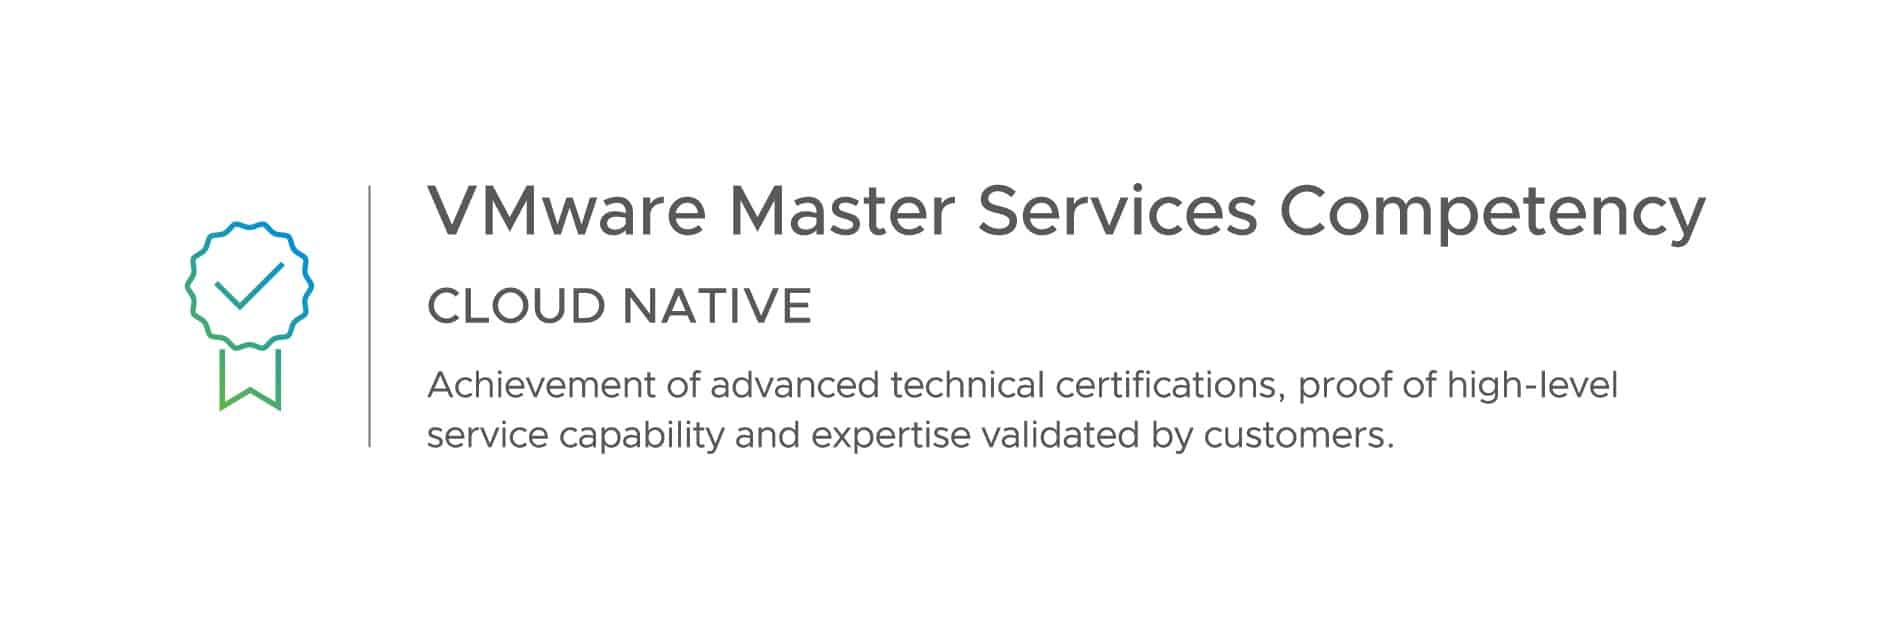 Capstone IT Achieves VMware Master Services Competency in Cloud Native Expertise